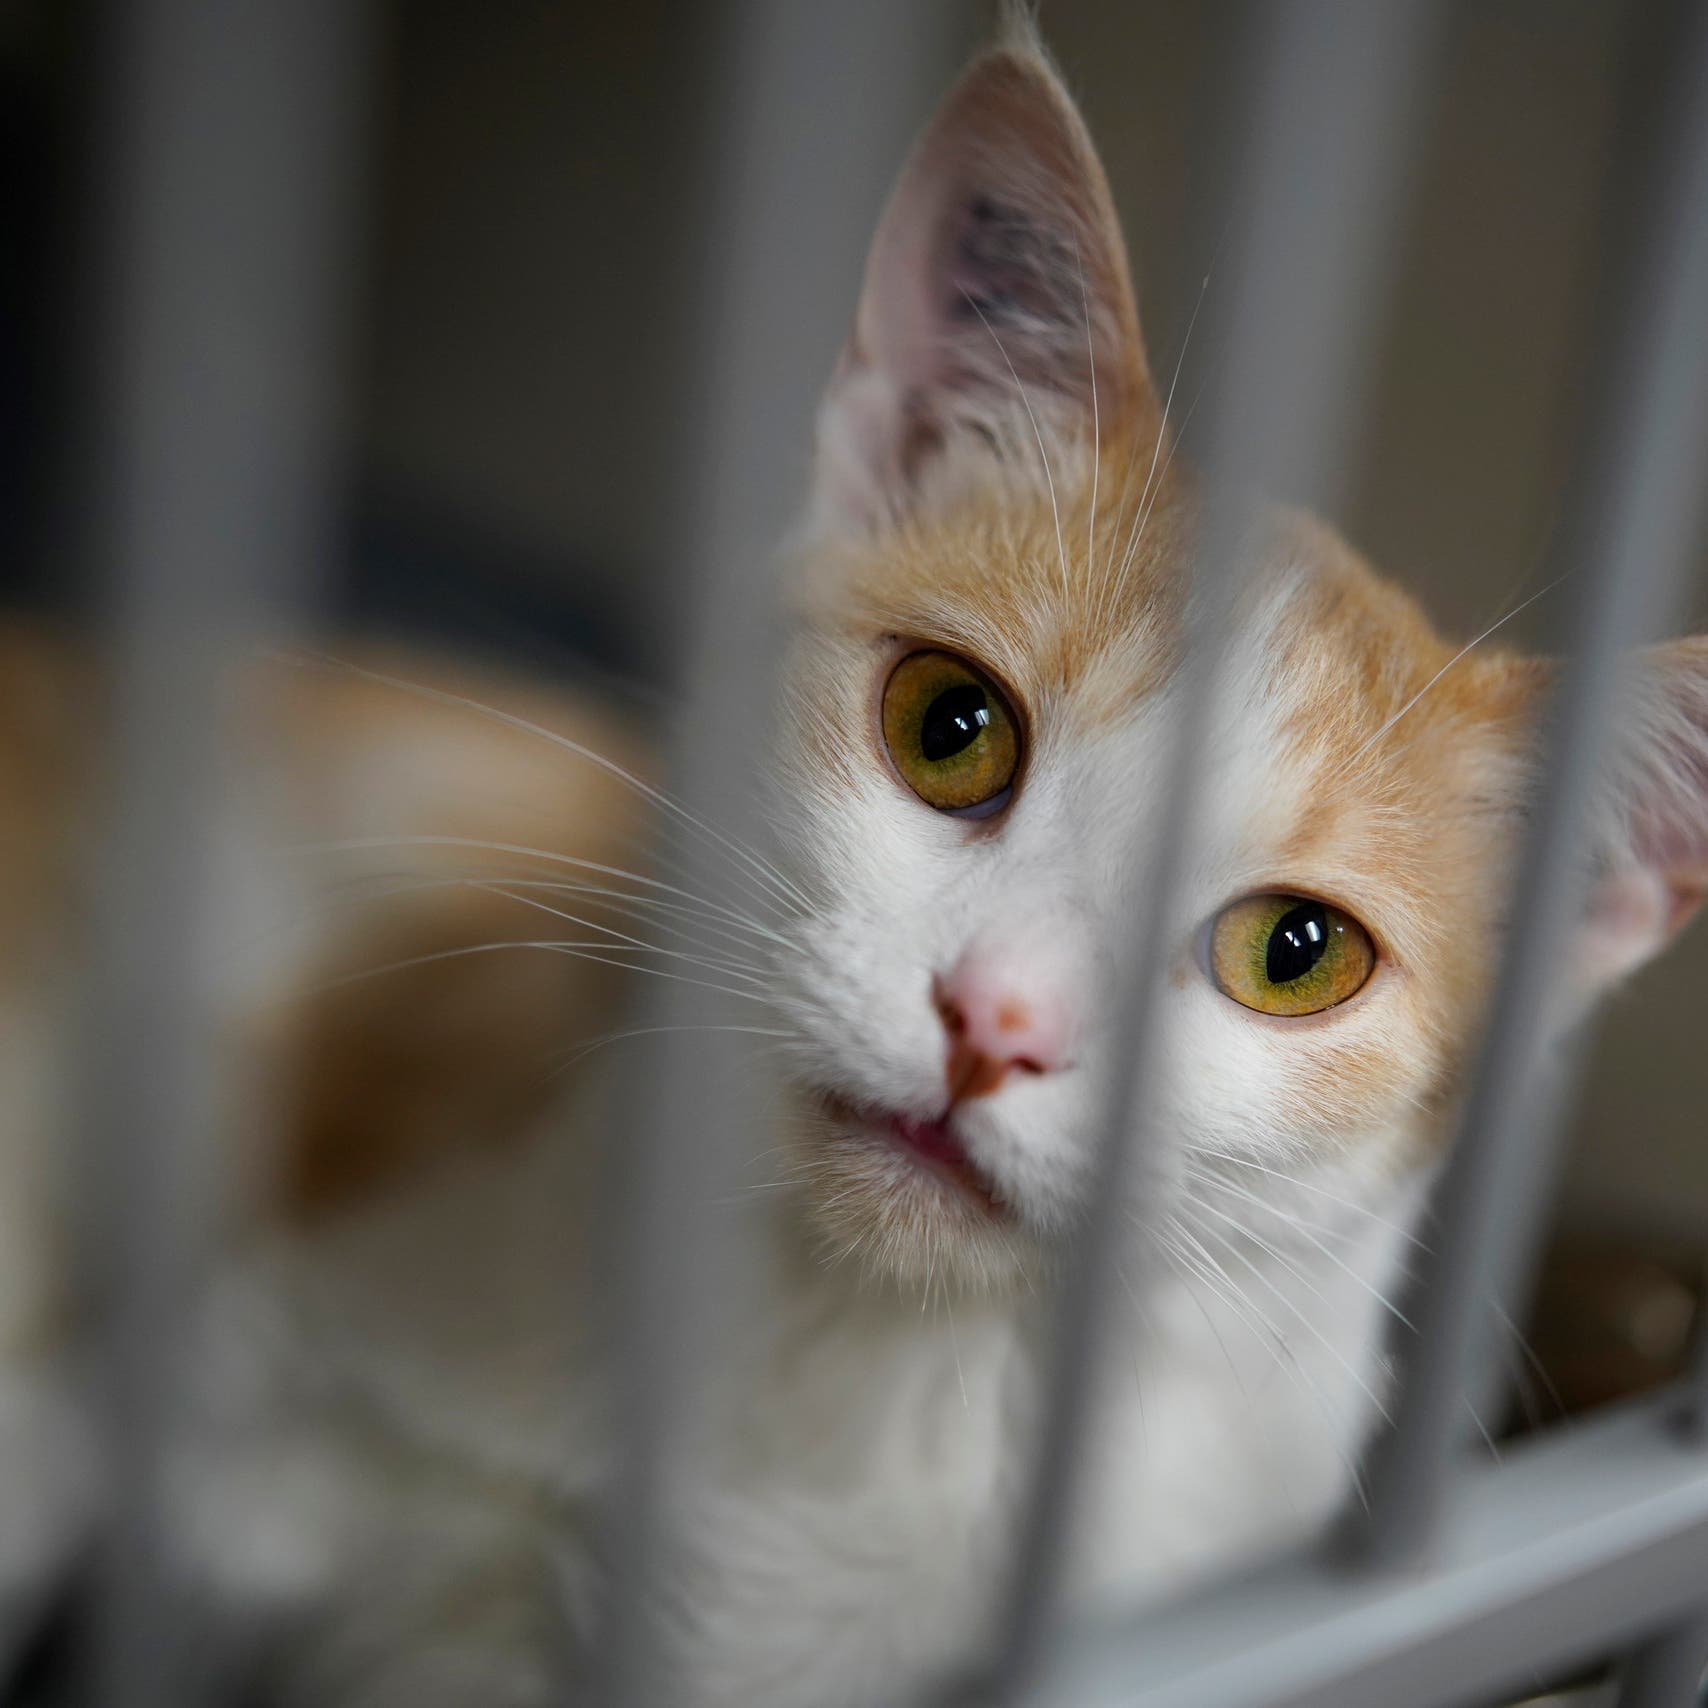 Dead woman in Kuwait found unidentifiable after pet cats eat her face off